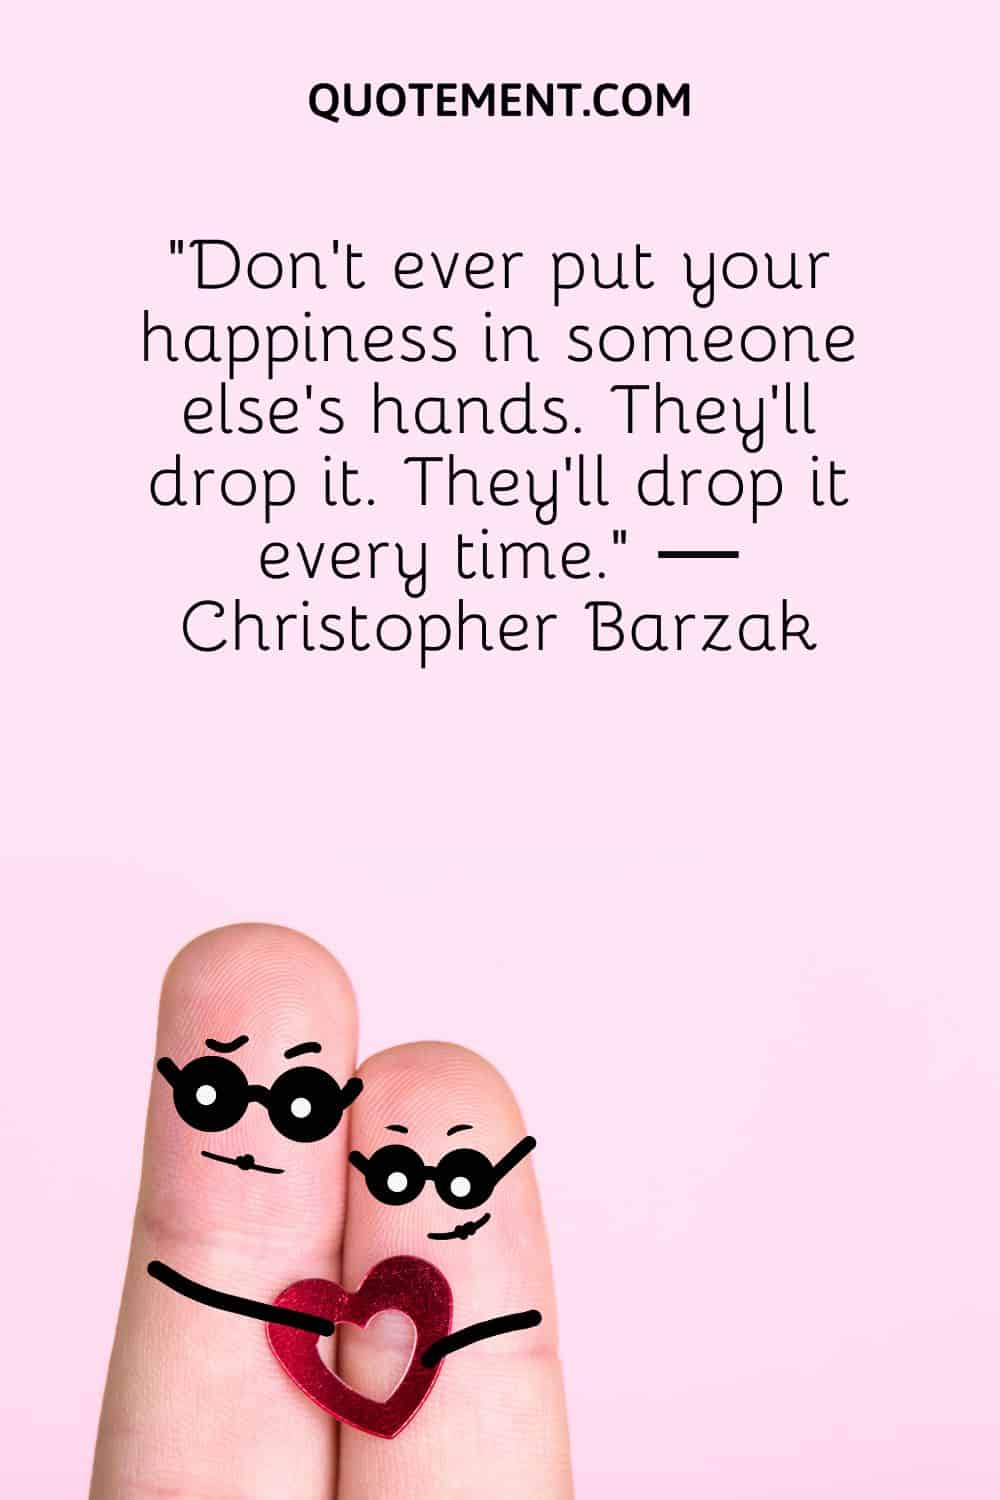 “Don’t ever put your happiness in someone else’s hands. They’ll drop it. They’ll drop it every time.” ― Christopher Barzak